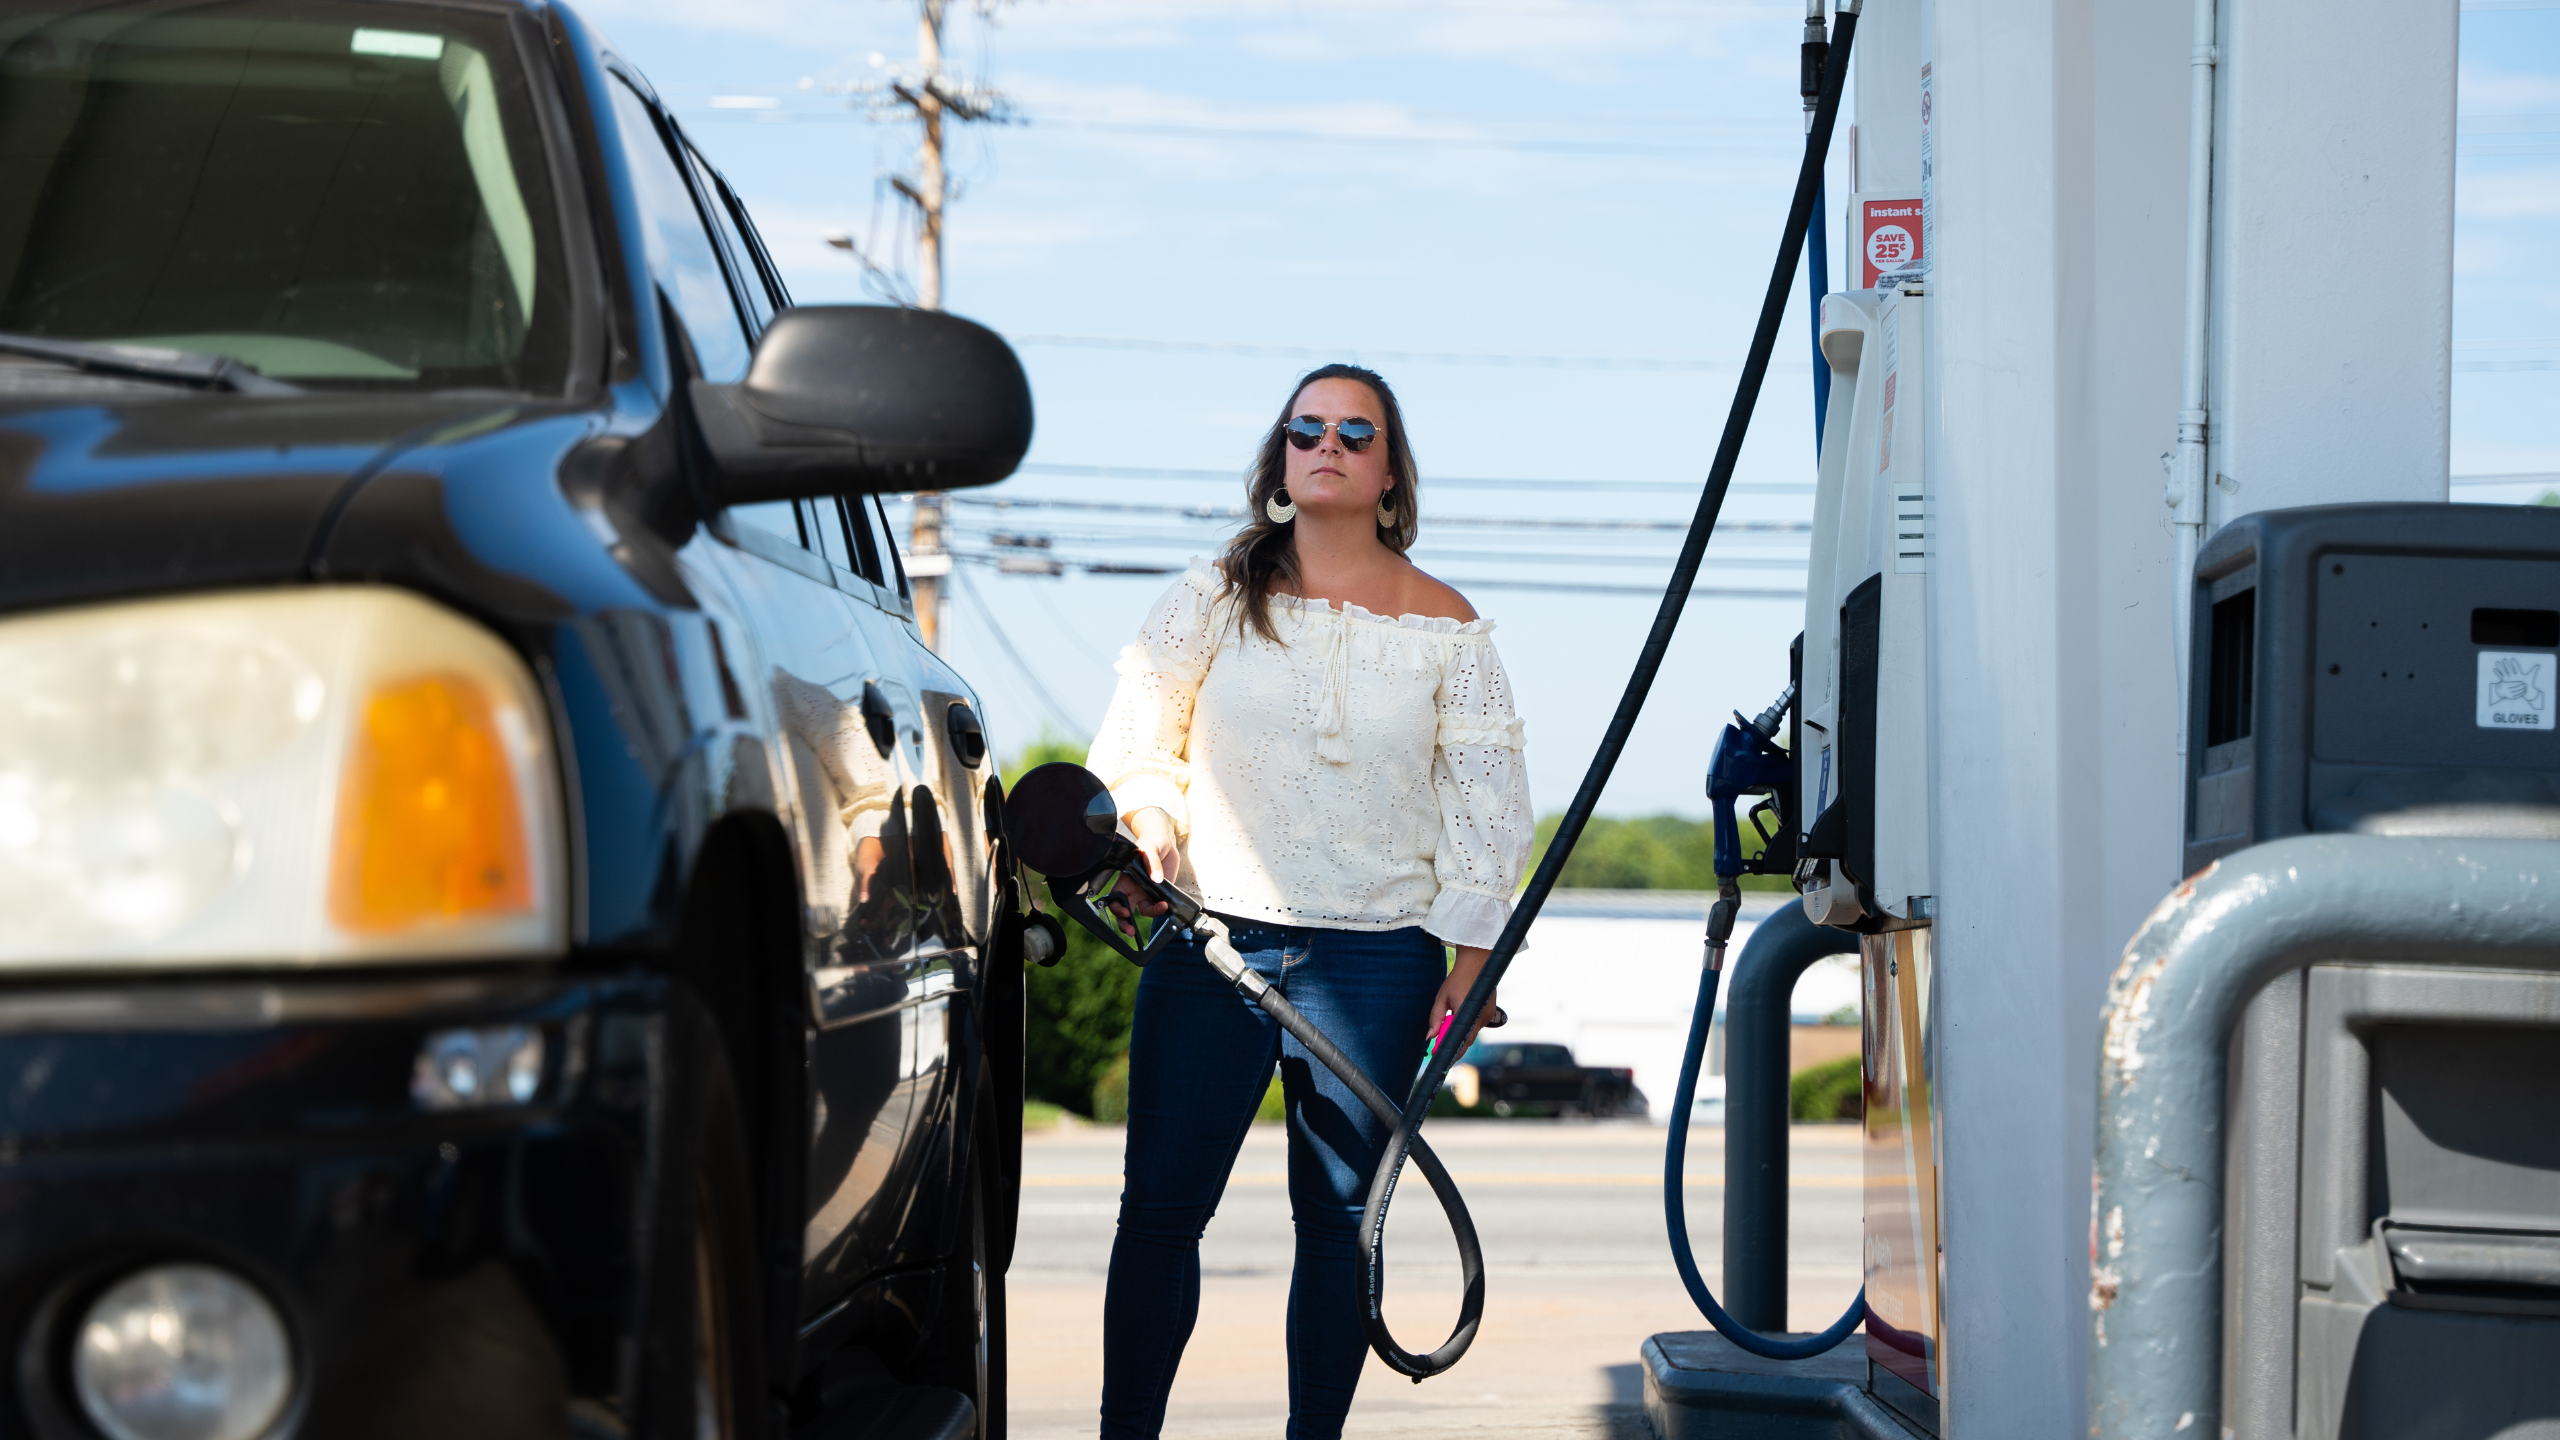 woman alert looking around while pumping gas